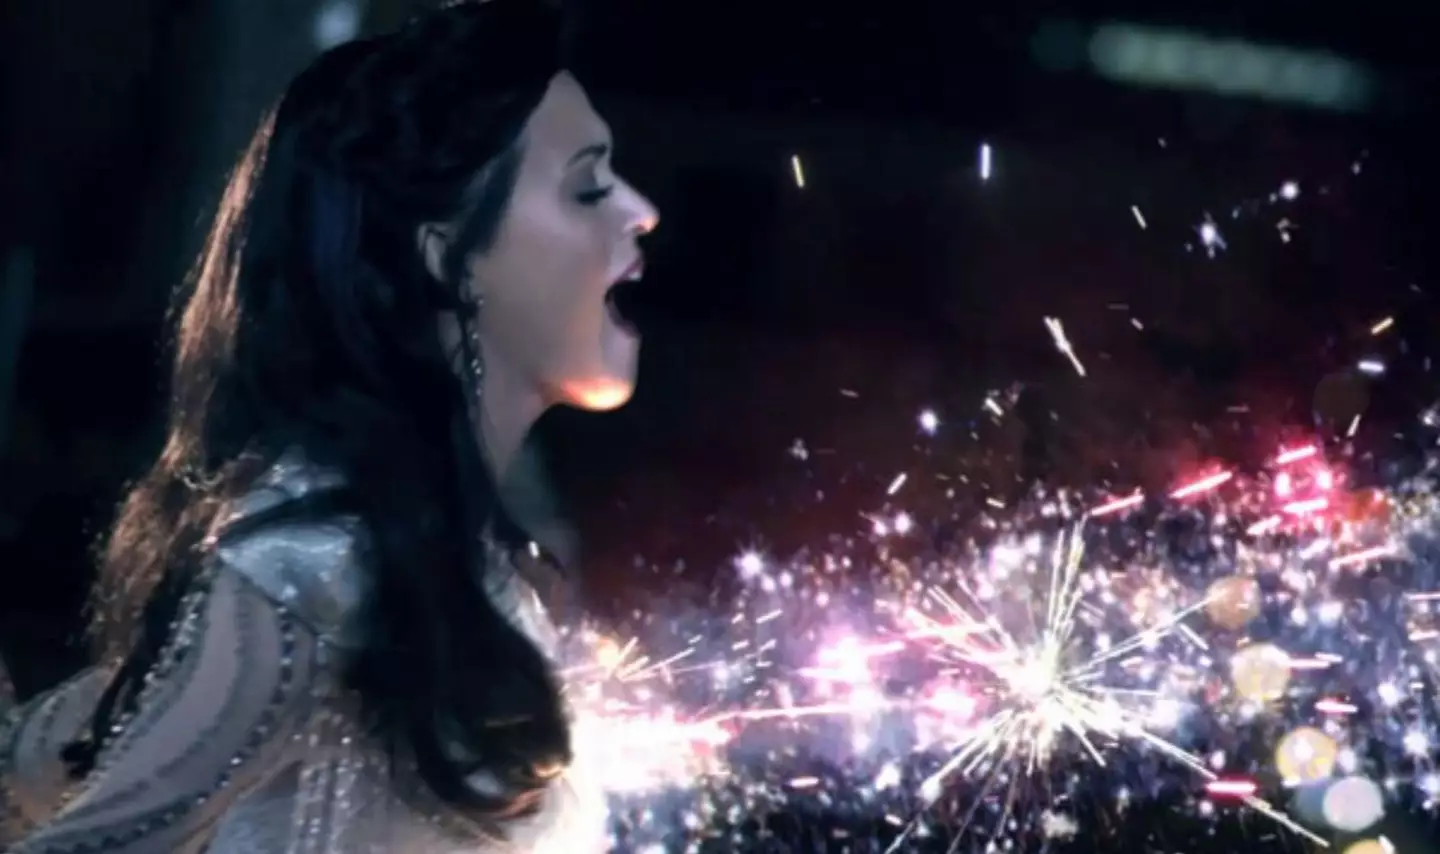 Firework was released in 2010. (Capitol Records/Katy Perry/YouTube)